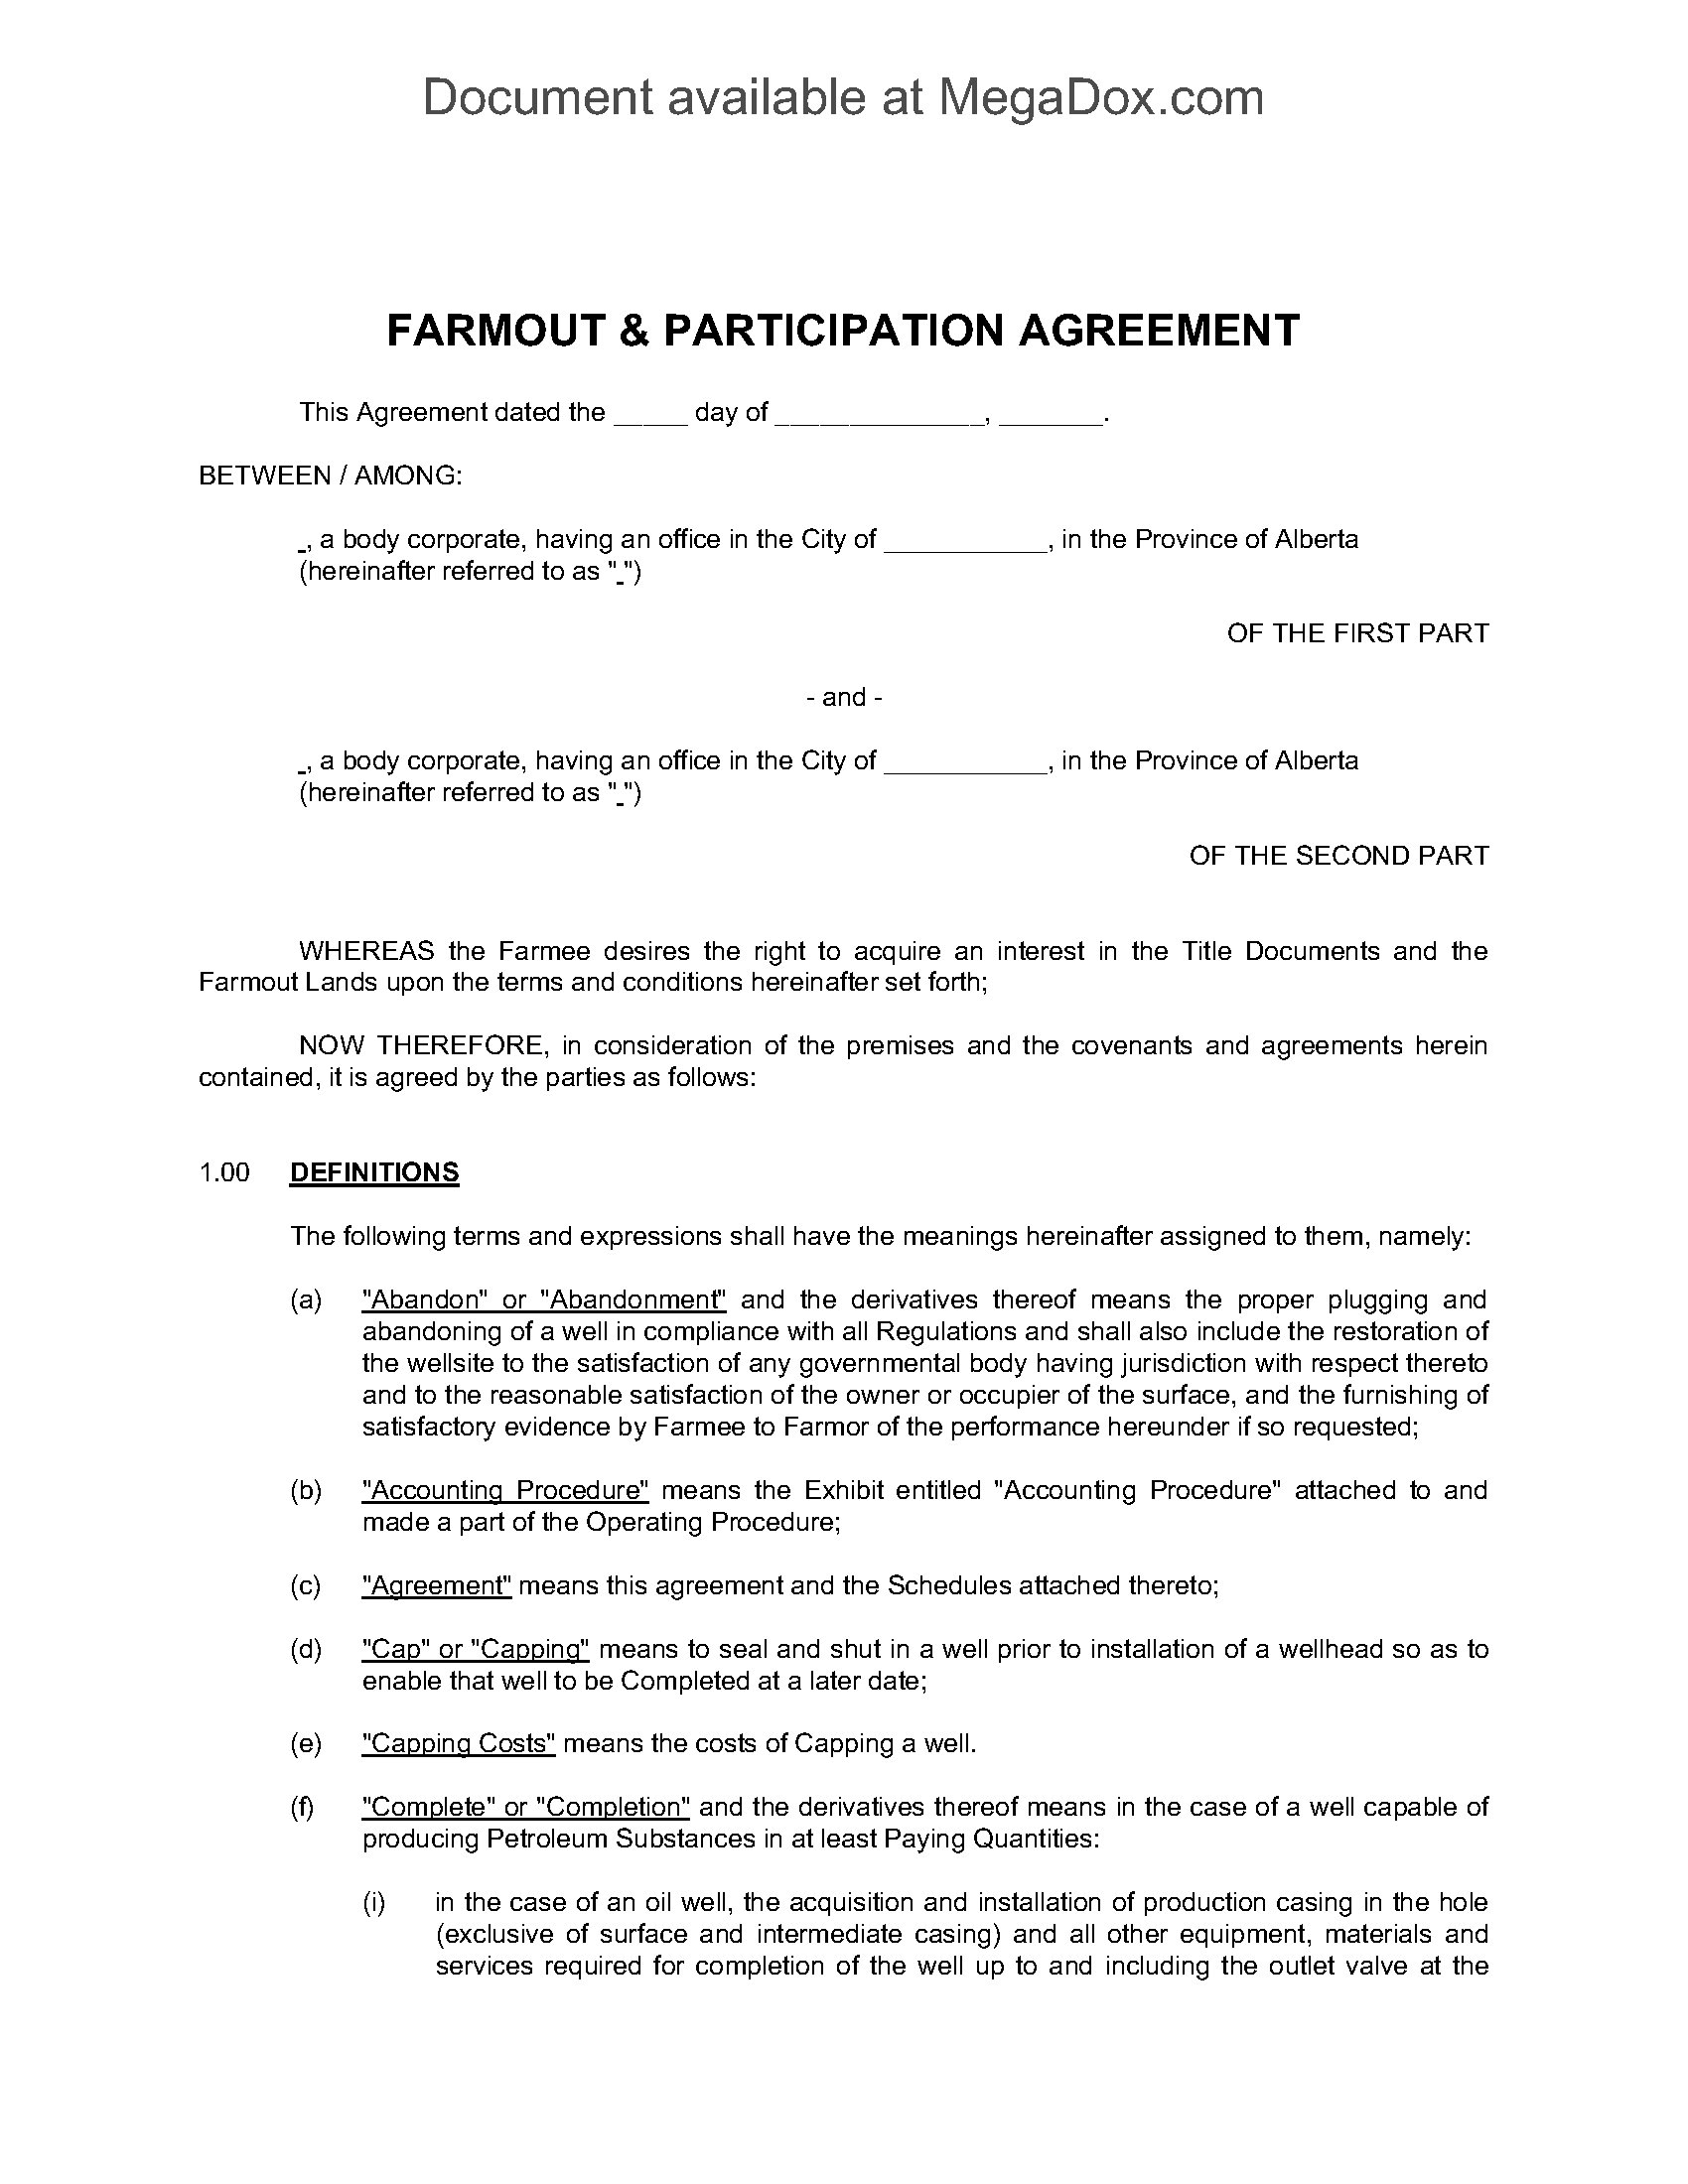 Alberta Farmout And Participation Agreement Legal Forms And Business Templates Megadox Com